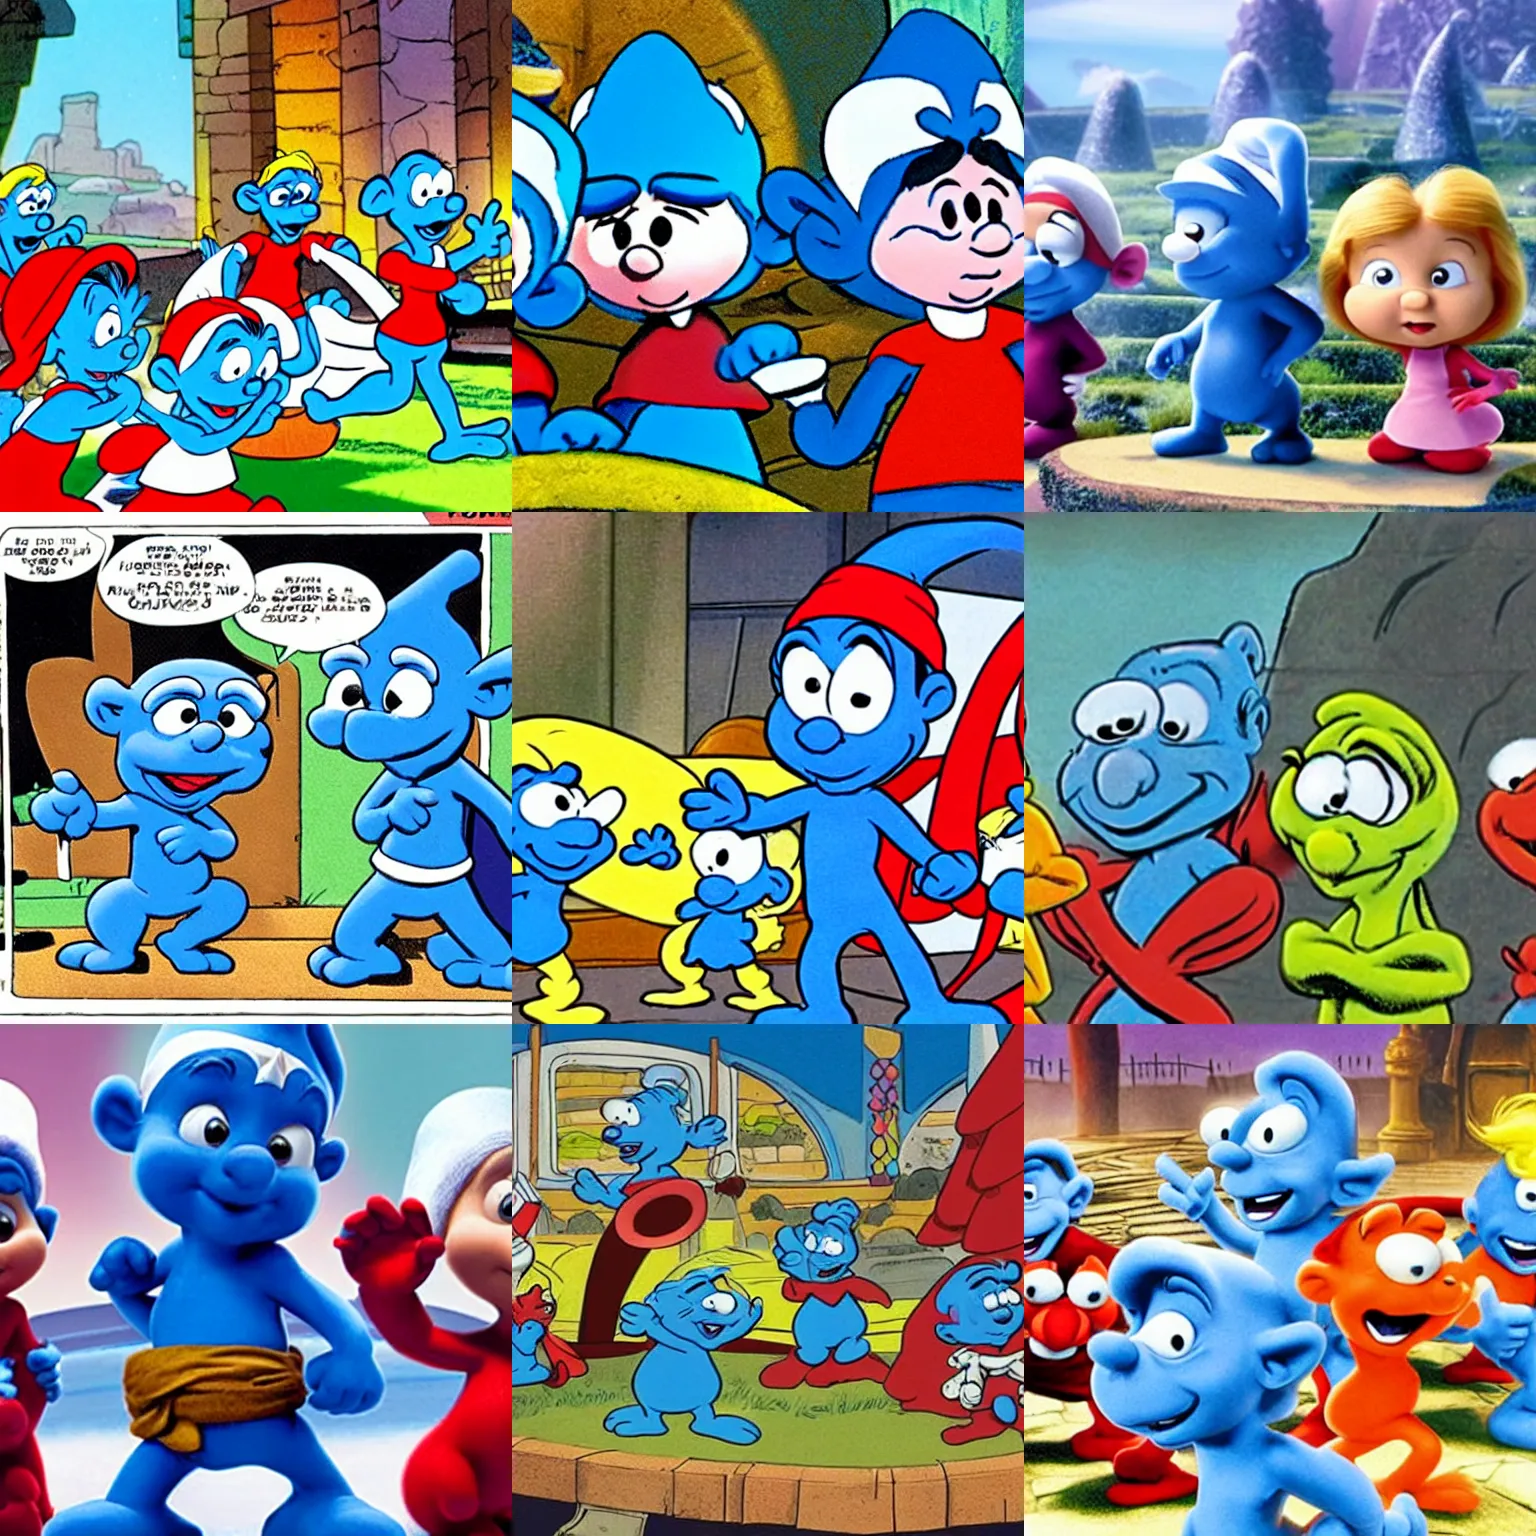 Prompt: scene from an episode of the smurfs by peyo, with marvel's avengers